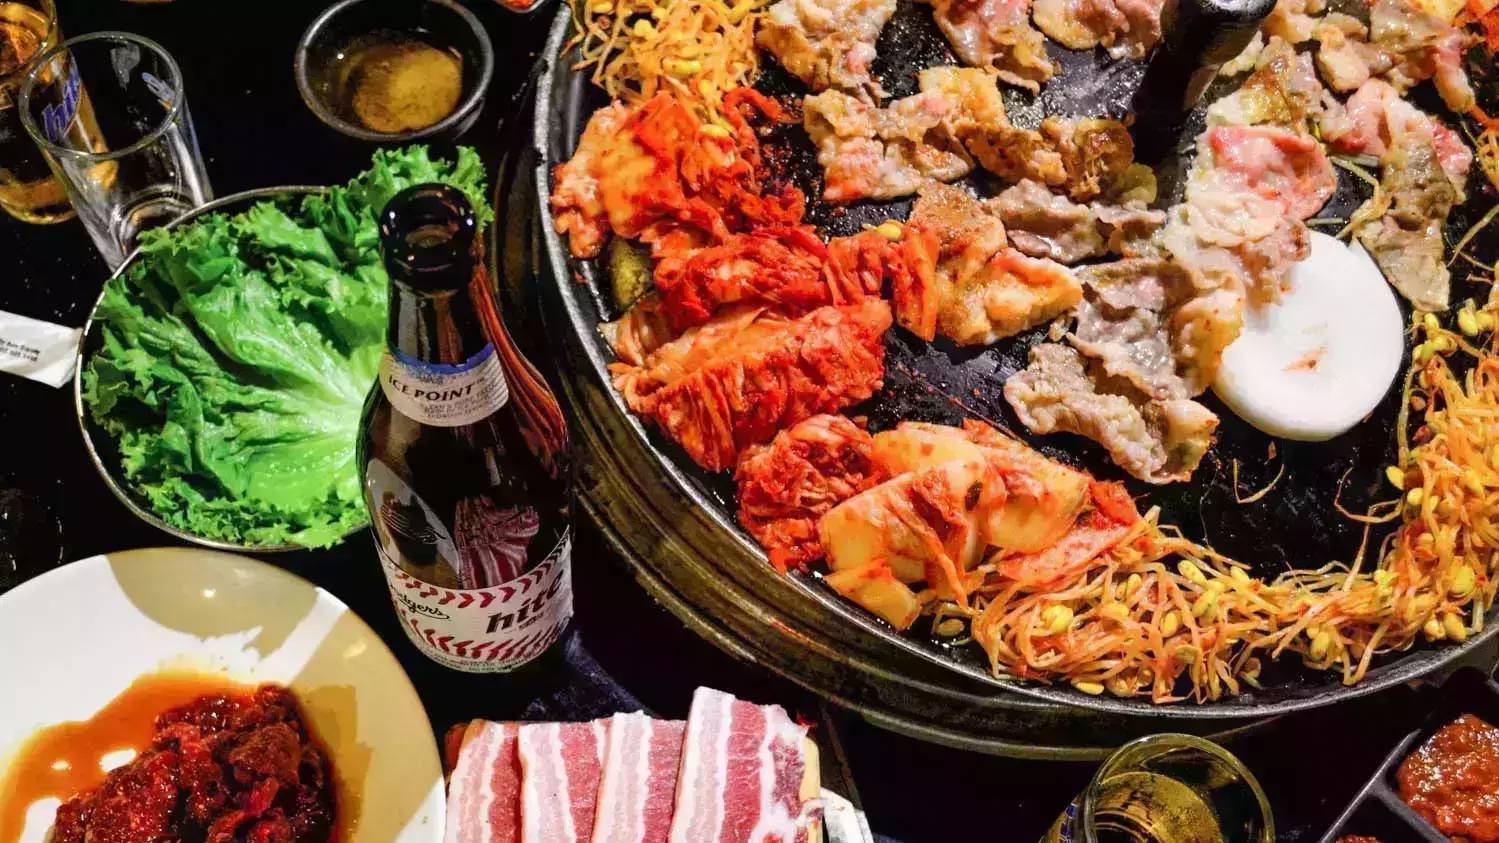 In Koreatown, eating barbecue is the right thing